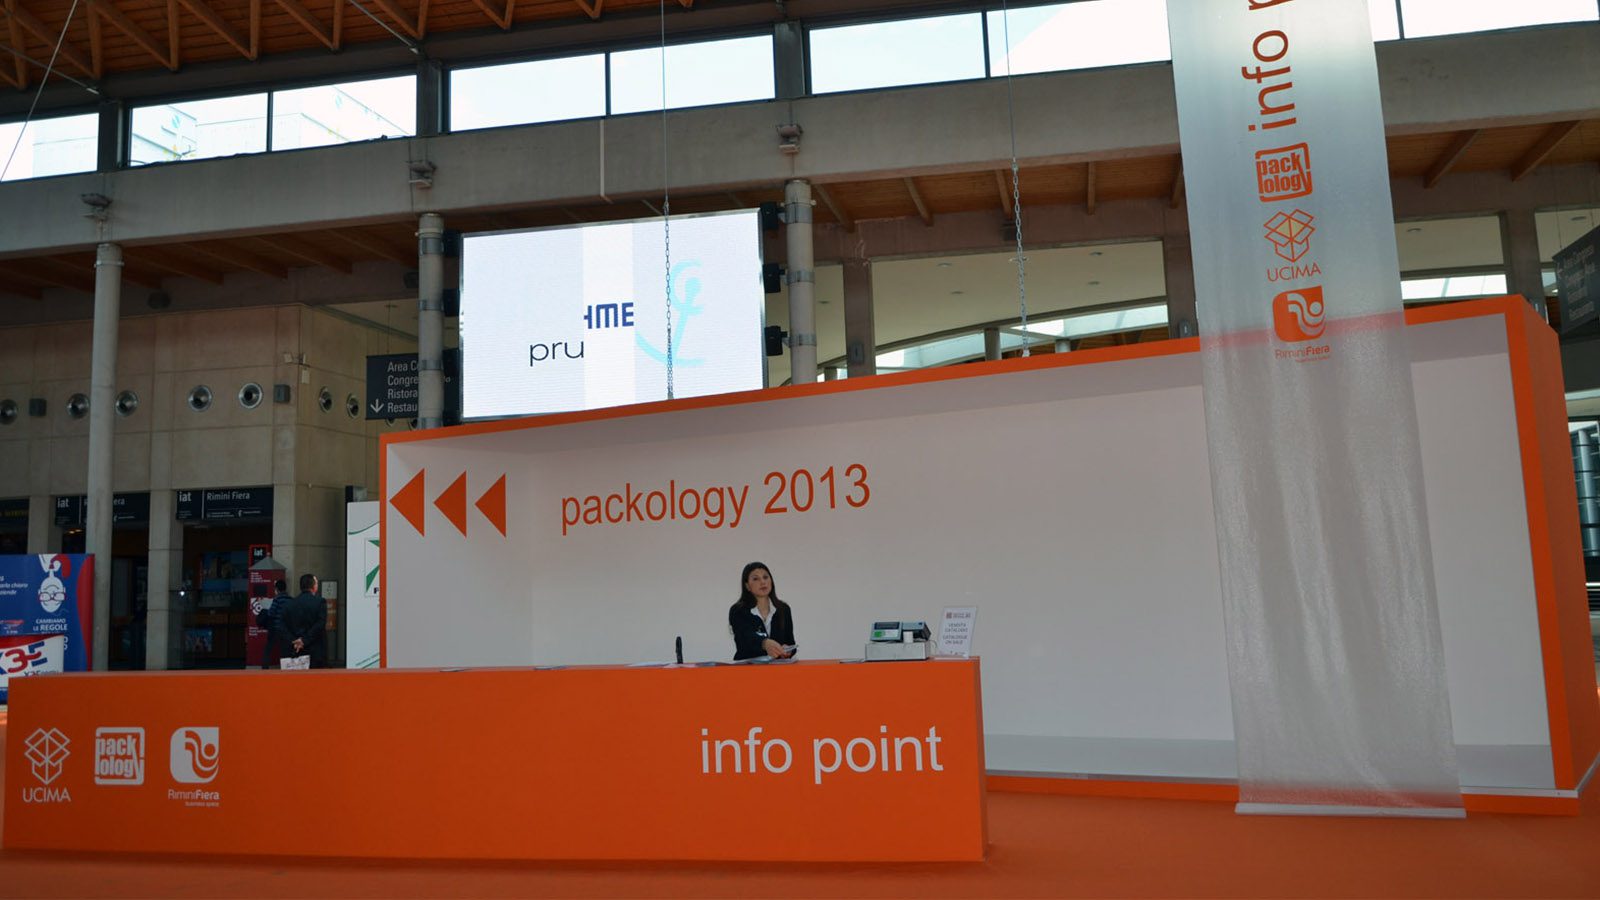 ucima-packology-2013-info-point